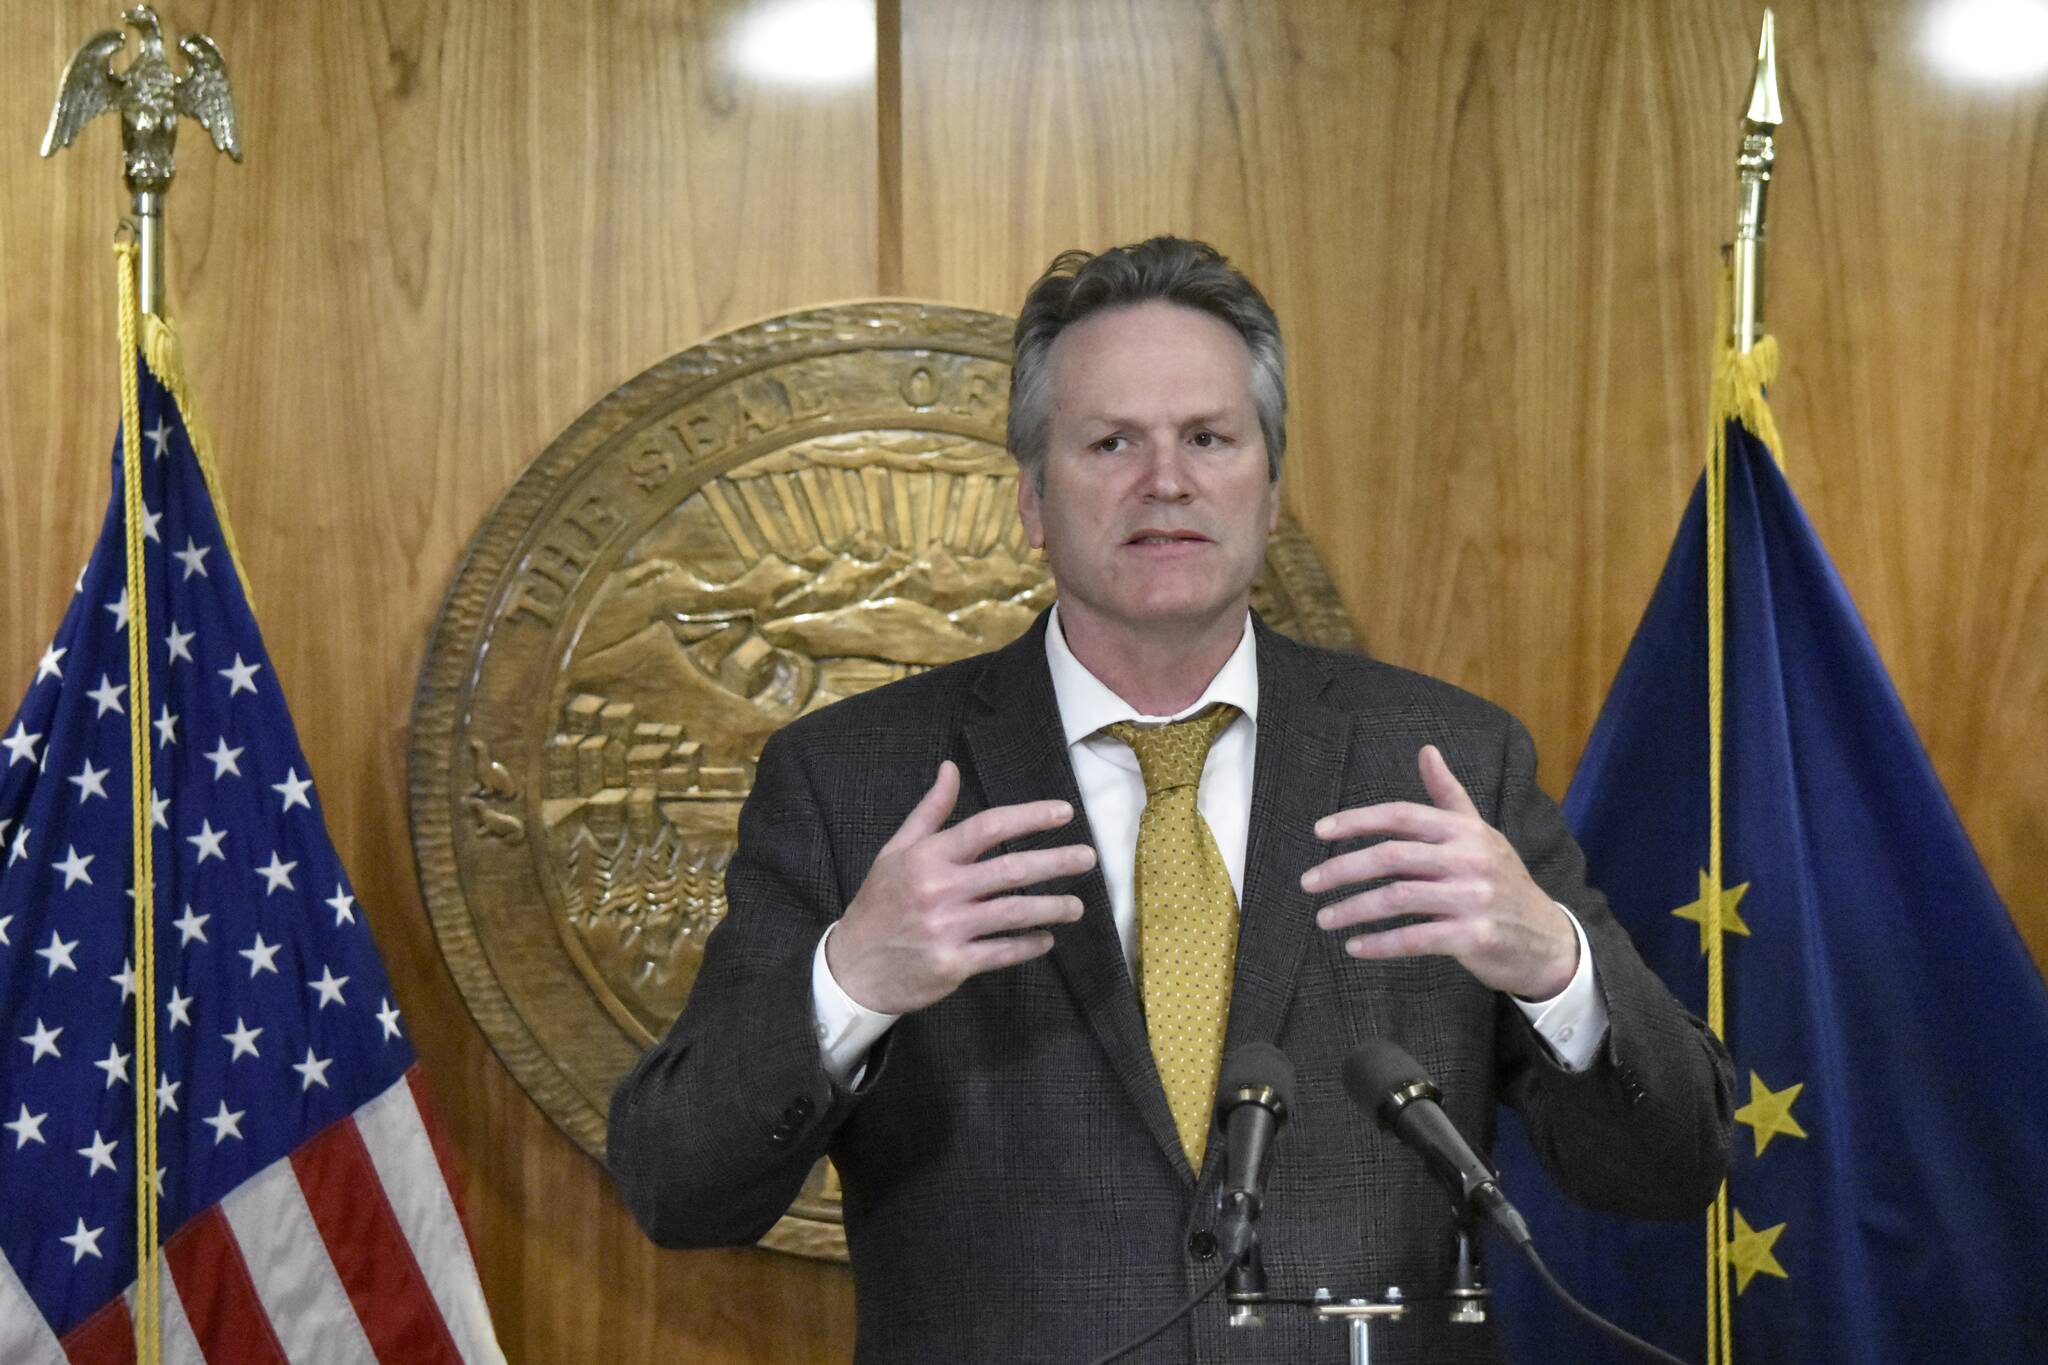 Gov. Mike Dunleavy speaks with reporters about the state’s budget at the Alaska State Capitol on Thursday, May 19, 2022. Dunleavy said lawmakers had sent a complete budget, and that there was no need for a special session. (Peter Segall / Juneau Empire)